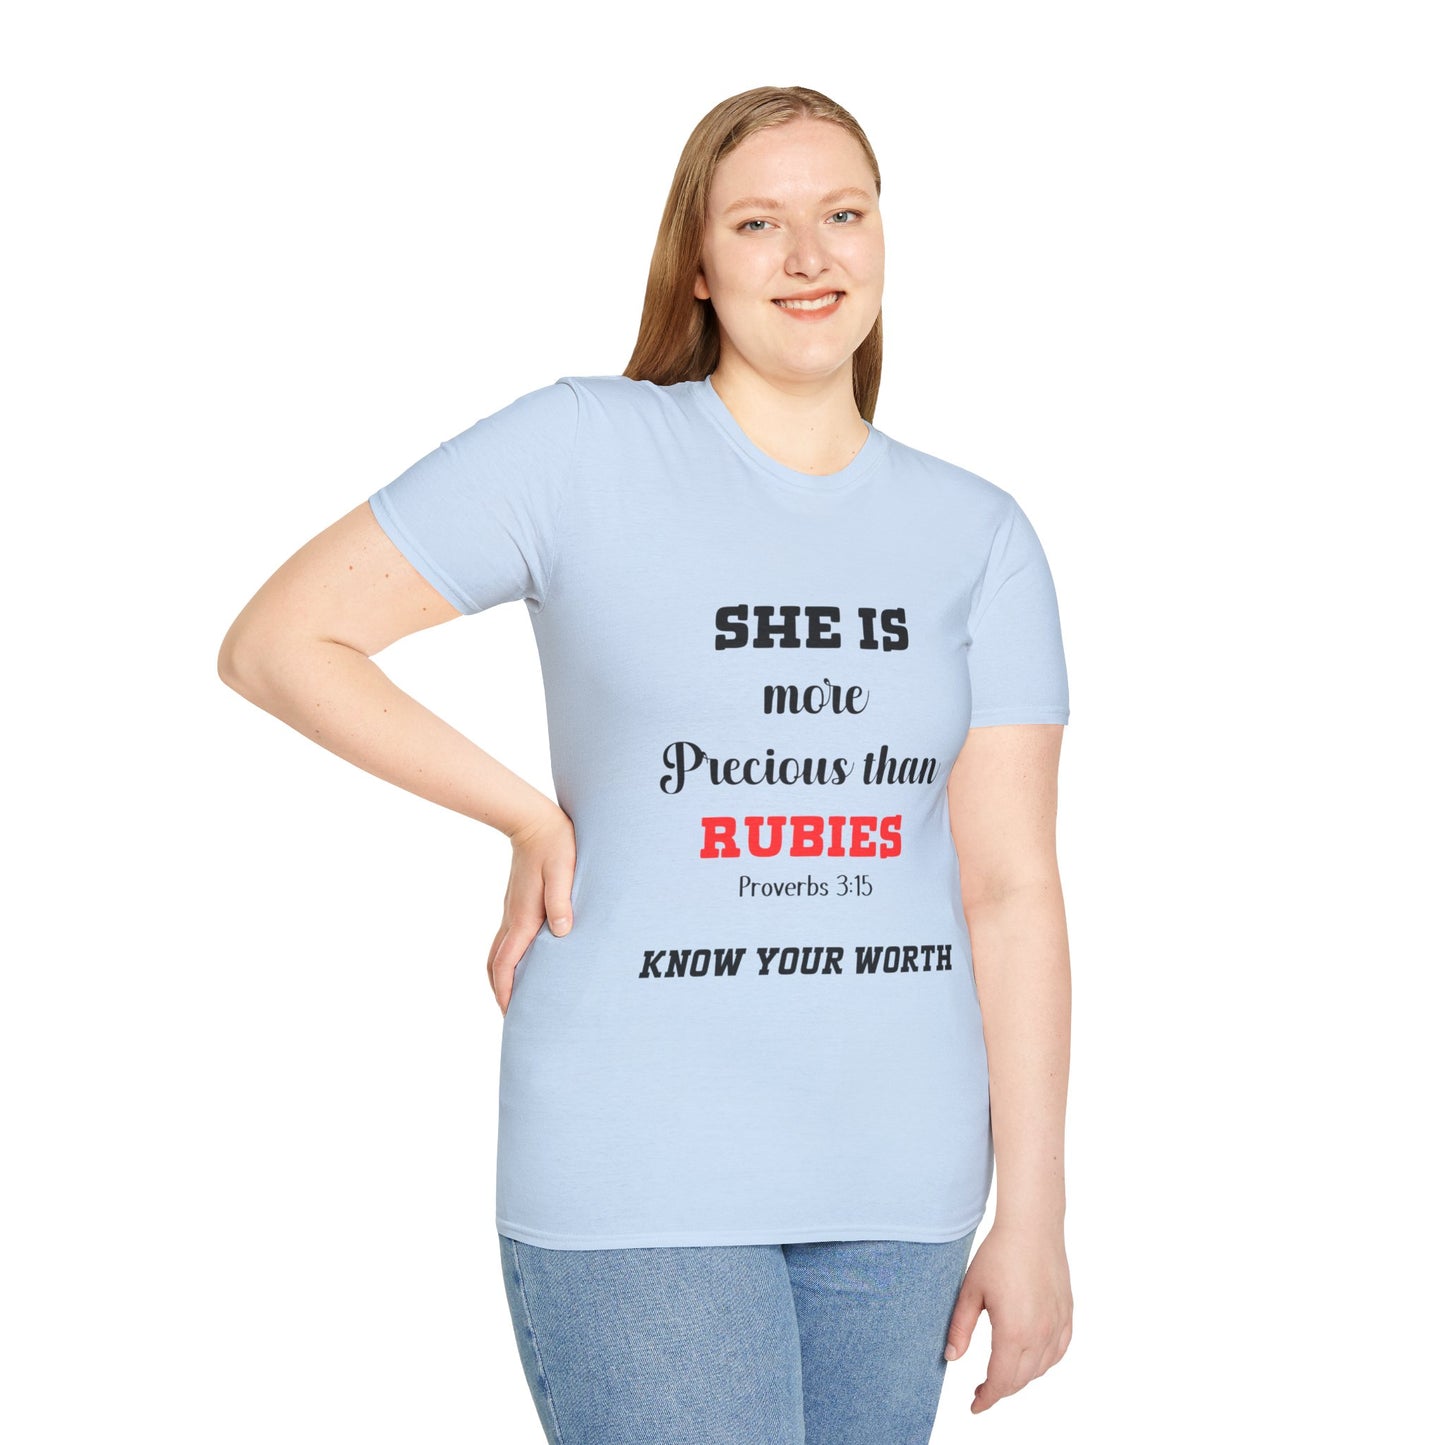 She is more precious than Rubies, Proverbs 3:15, Know Your Worth, Unisex Softstyle T-Shirt